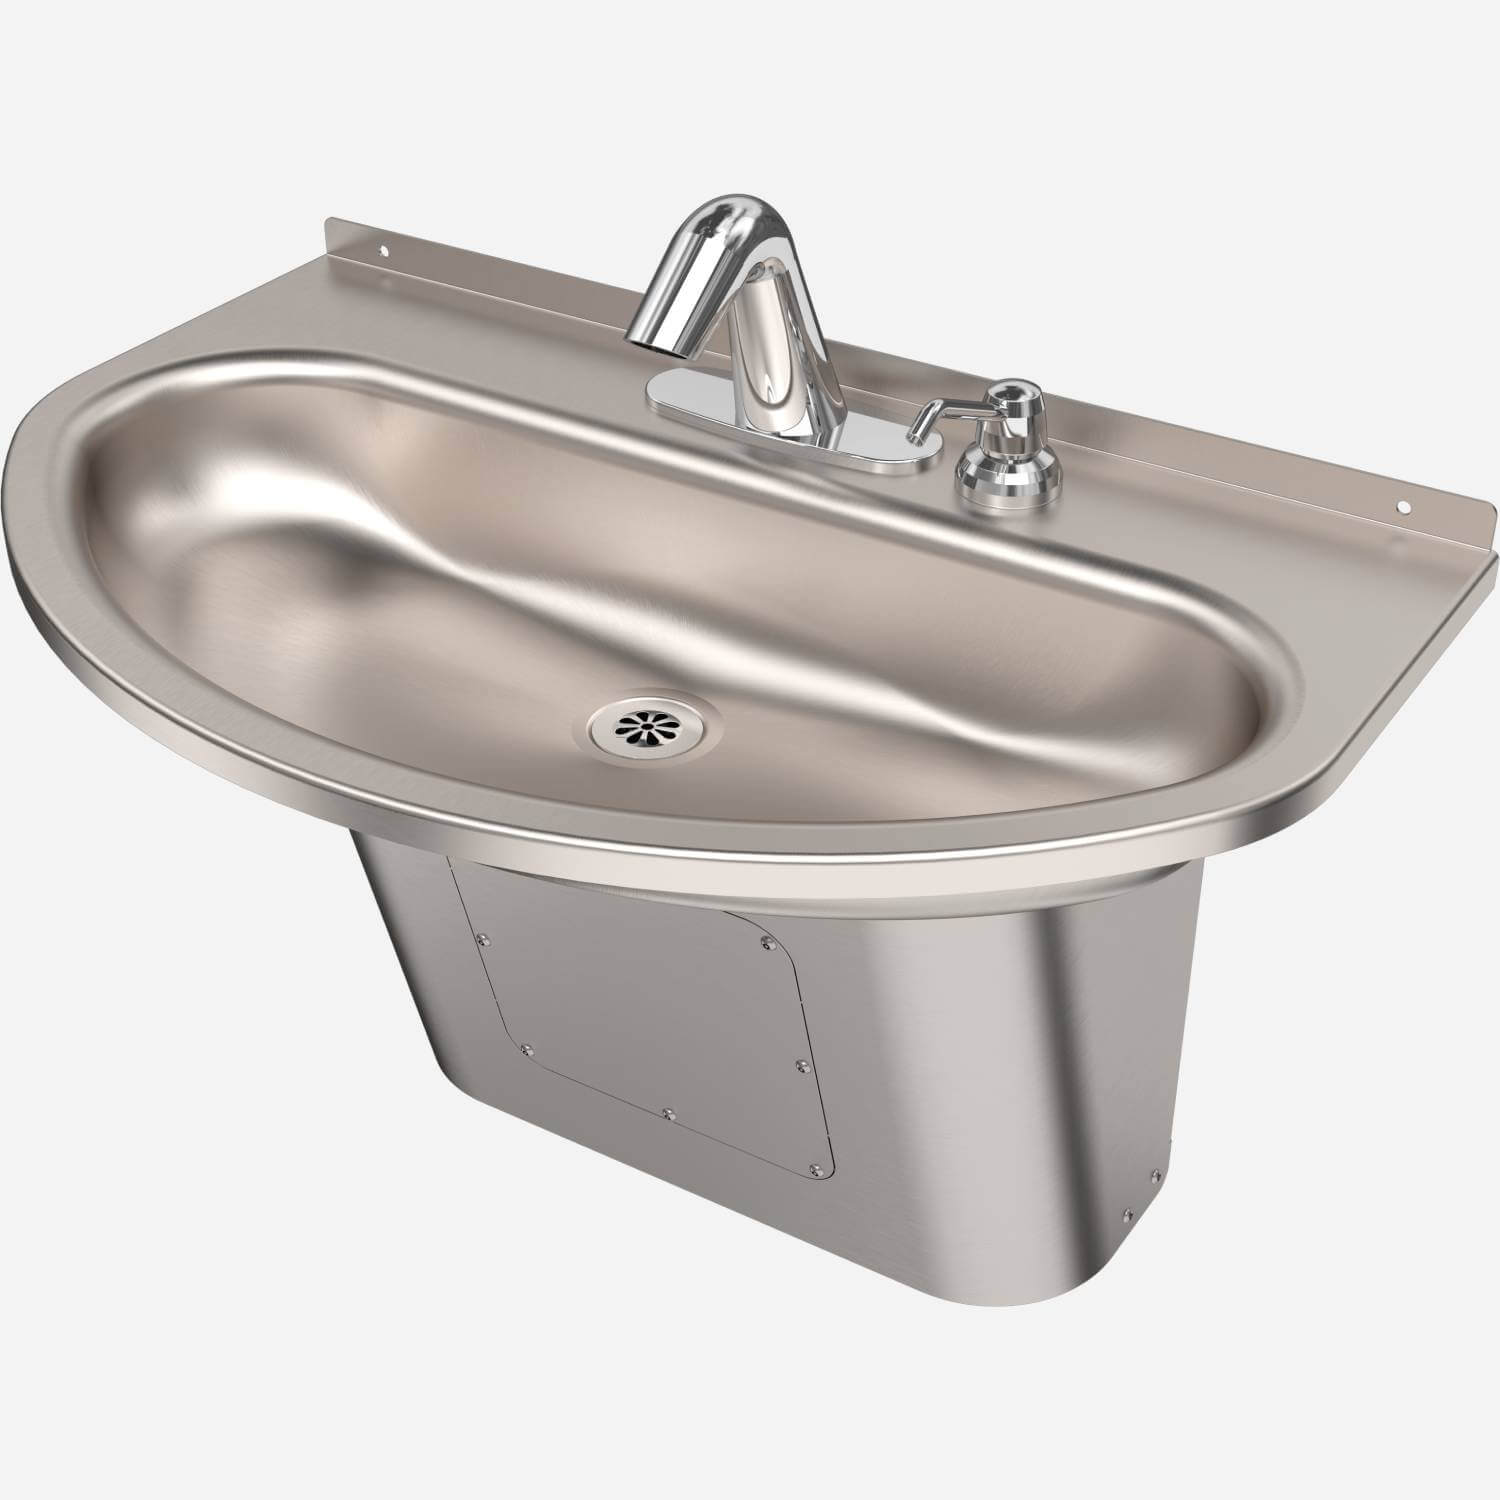 ACORN POWELL 255 STAINLESS STEEL INSET WASH BASIN WITH TAP LANDING  Ø355MM 